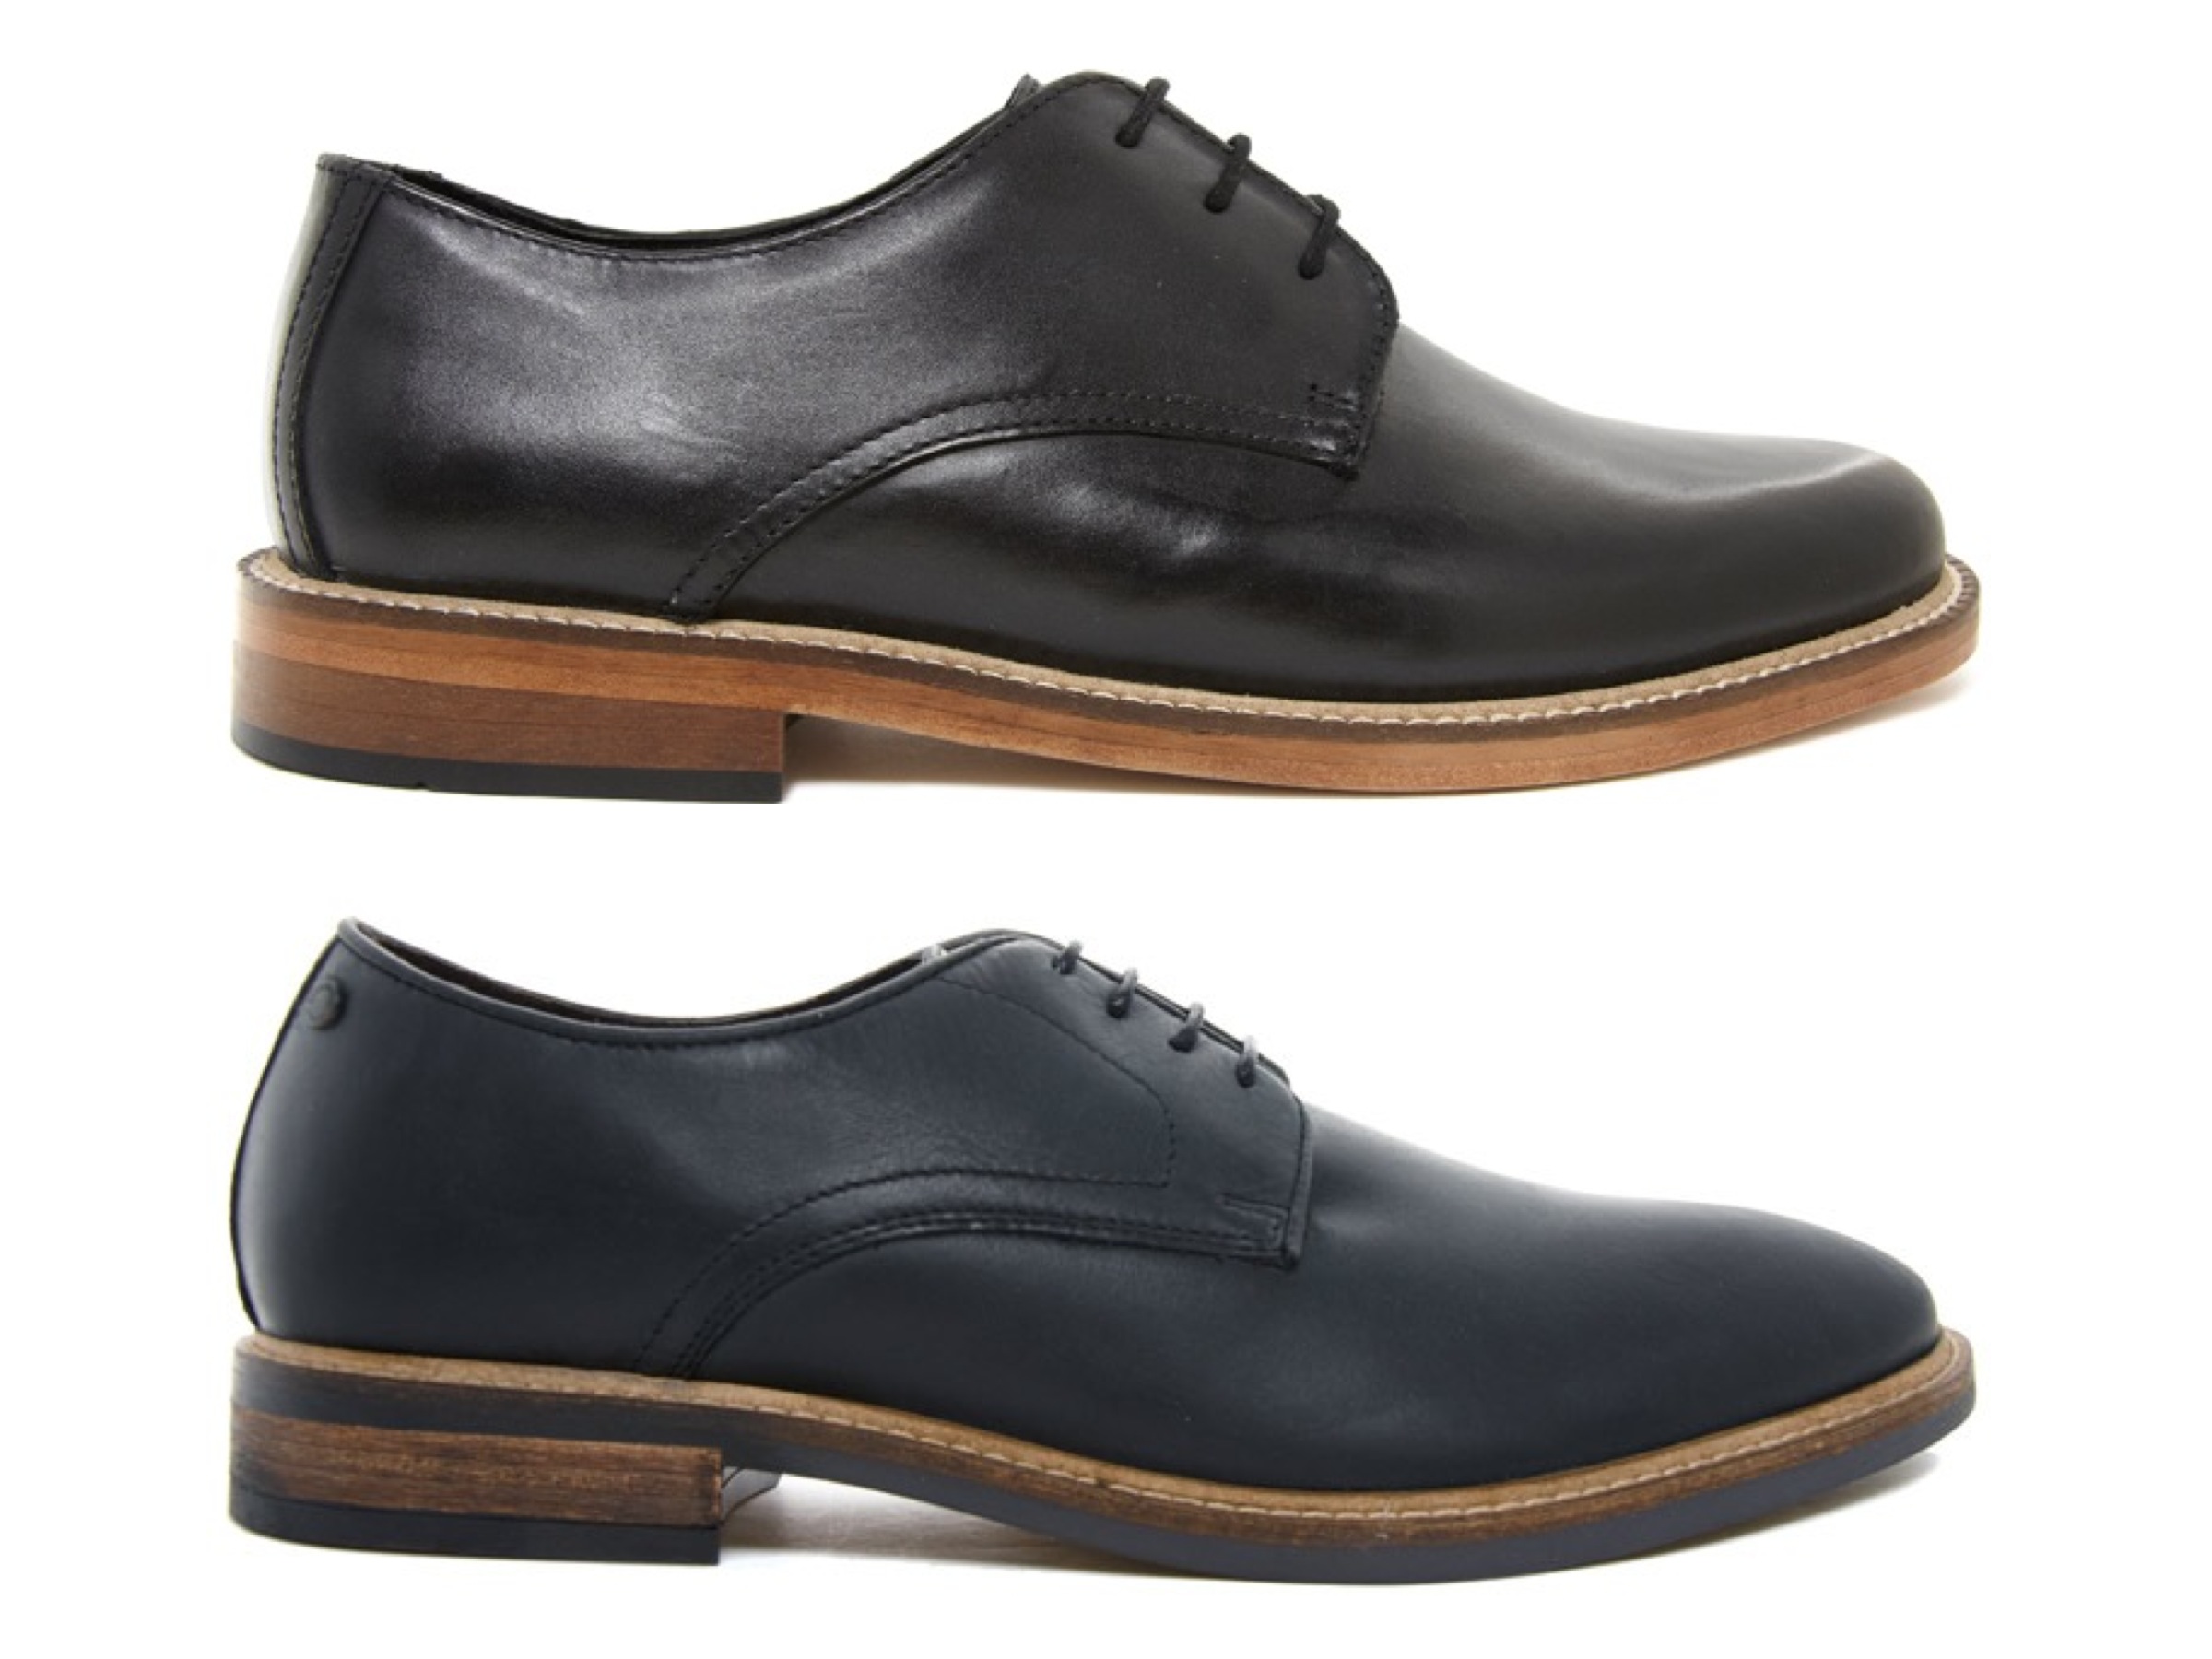 leather-soled shoes | To Live and Die By